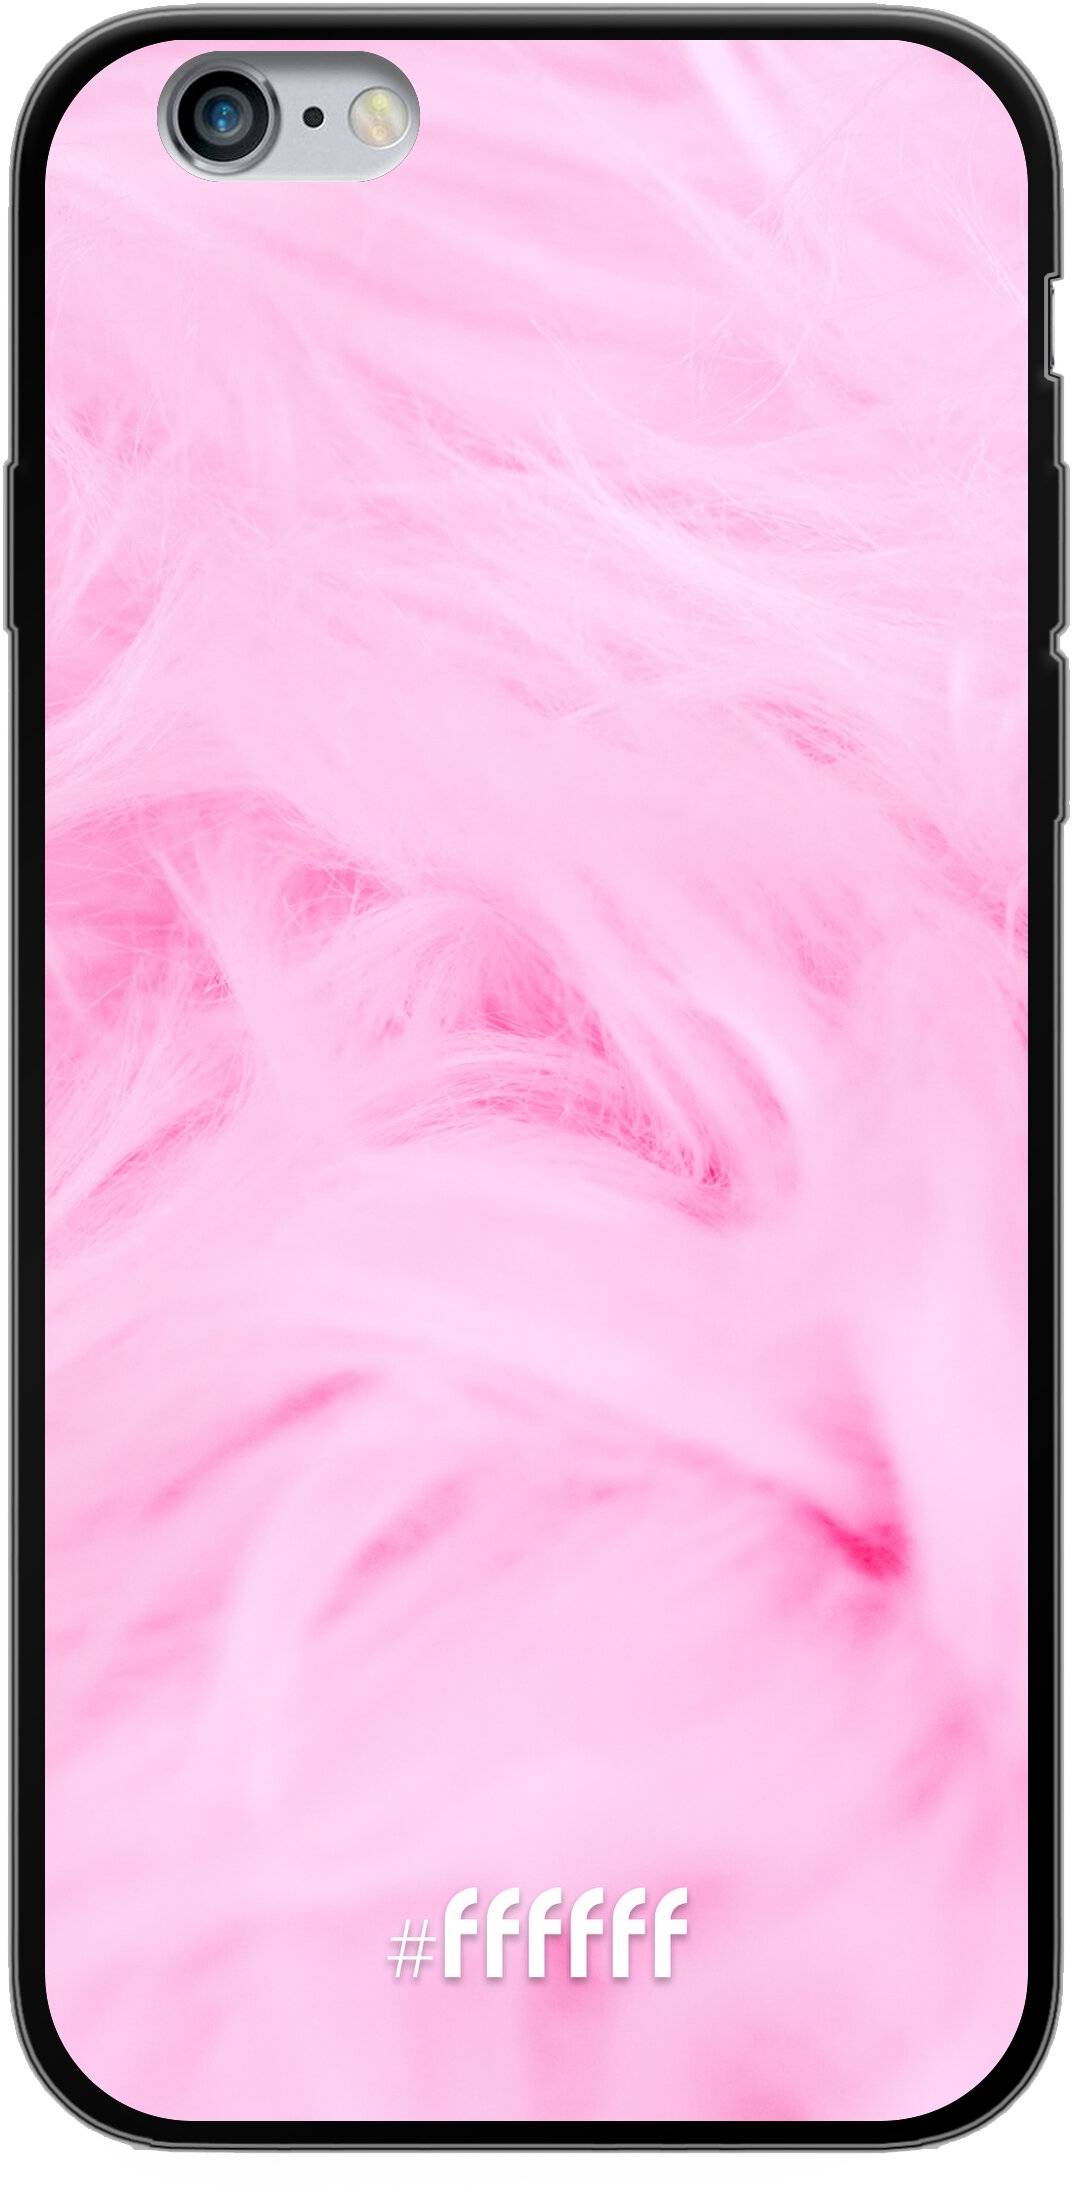 Cotton Candy iPhone 6